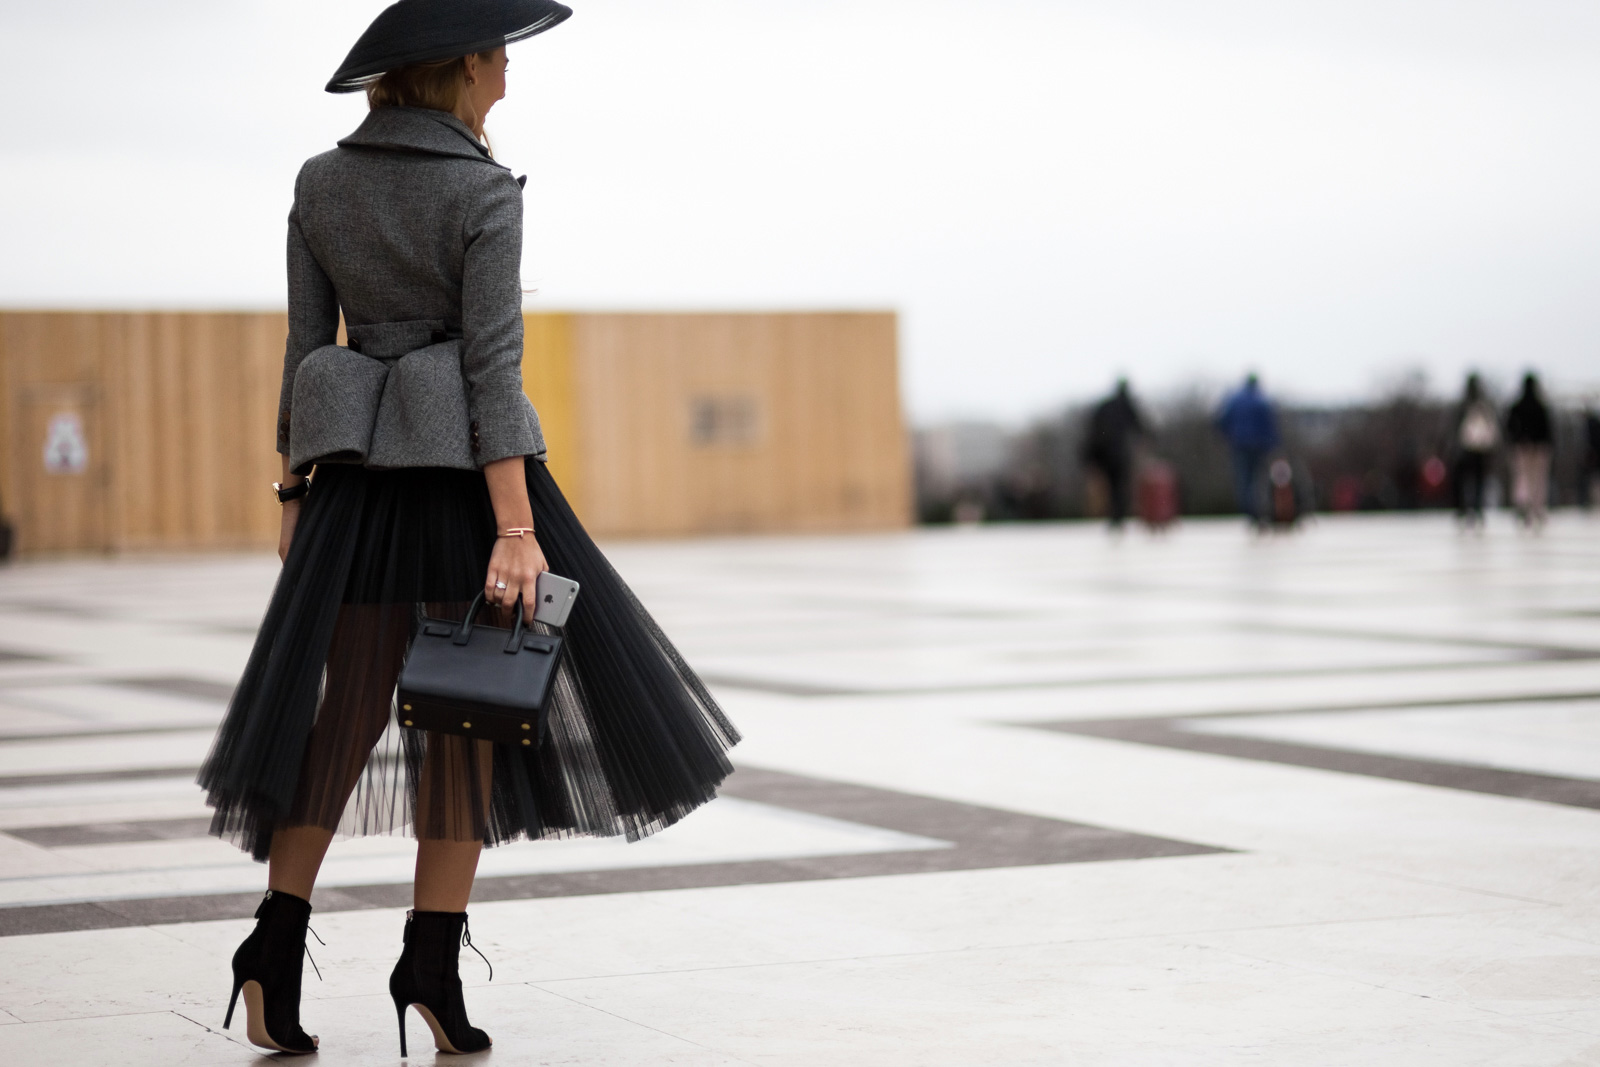 Alexandra Rakhimova wearing a Dior hat, Saint Laurent bag and Gianvito Rossi ankle boots after the Elie Saab Spring 2015 Haute Couture fashion show in Paris, France